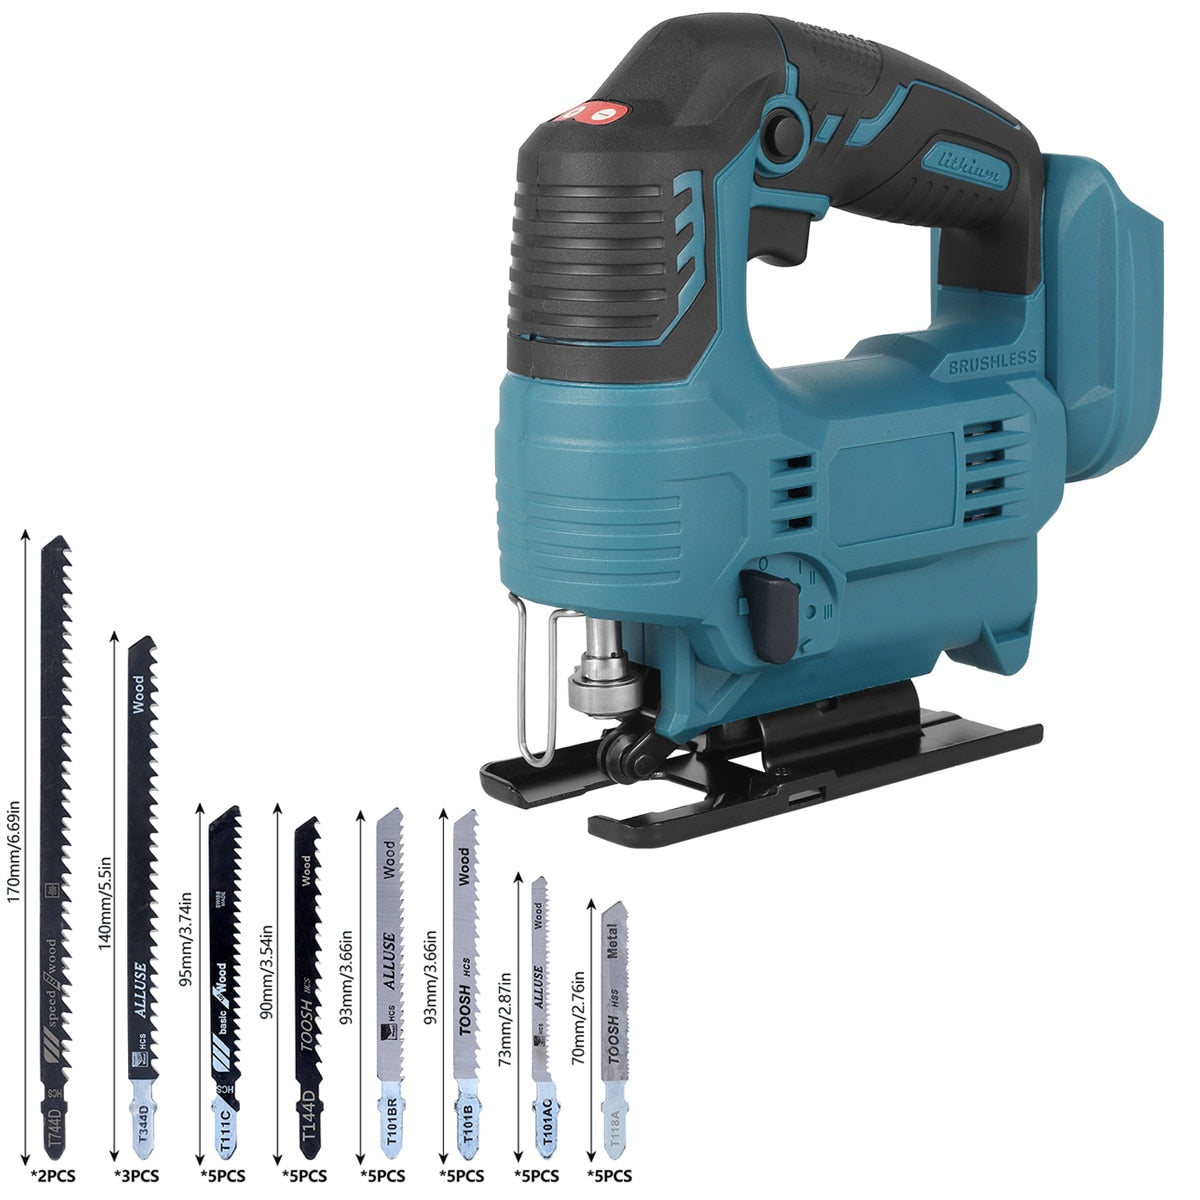 Brushless Electric Jigsaw 900W Cordless, 3 Variable Speed (For Makita 18V Battery)